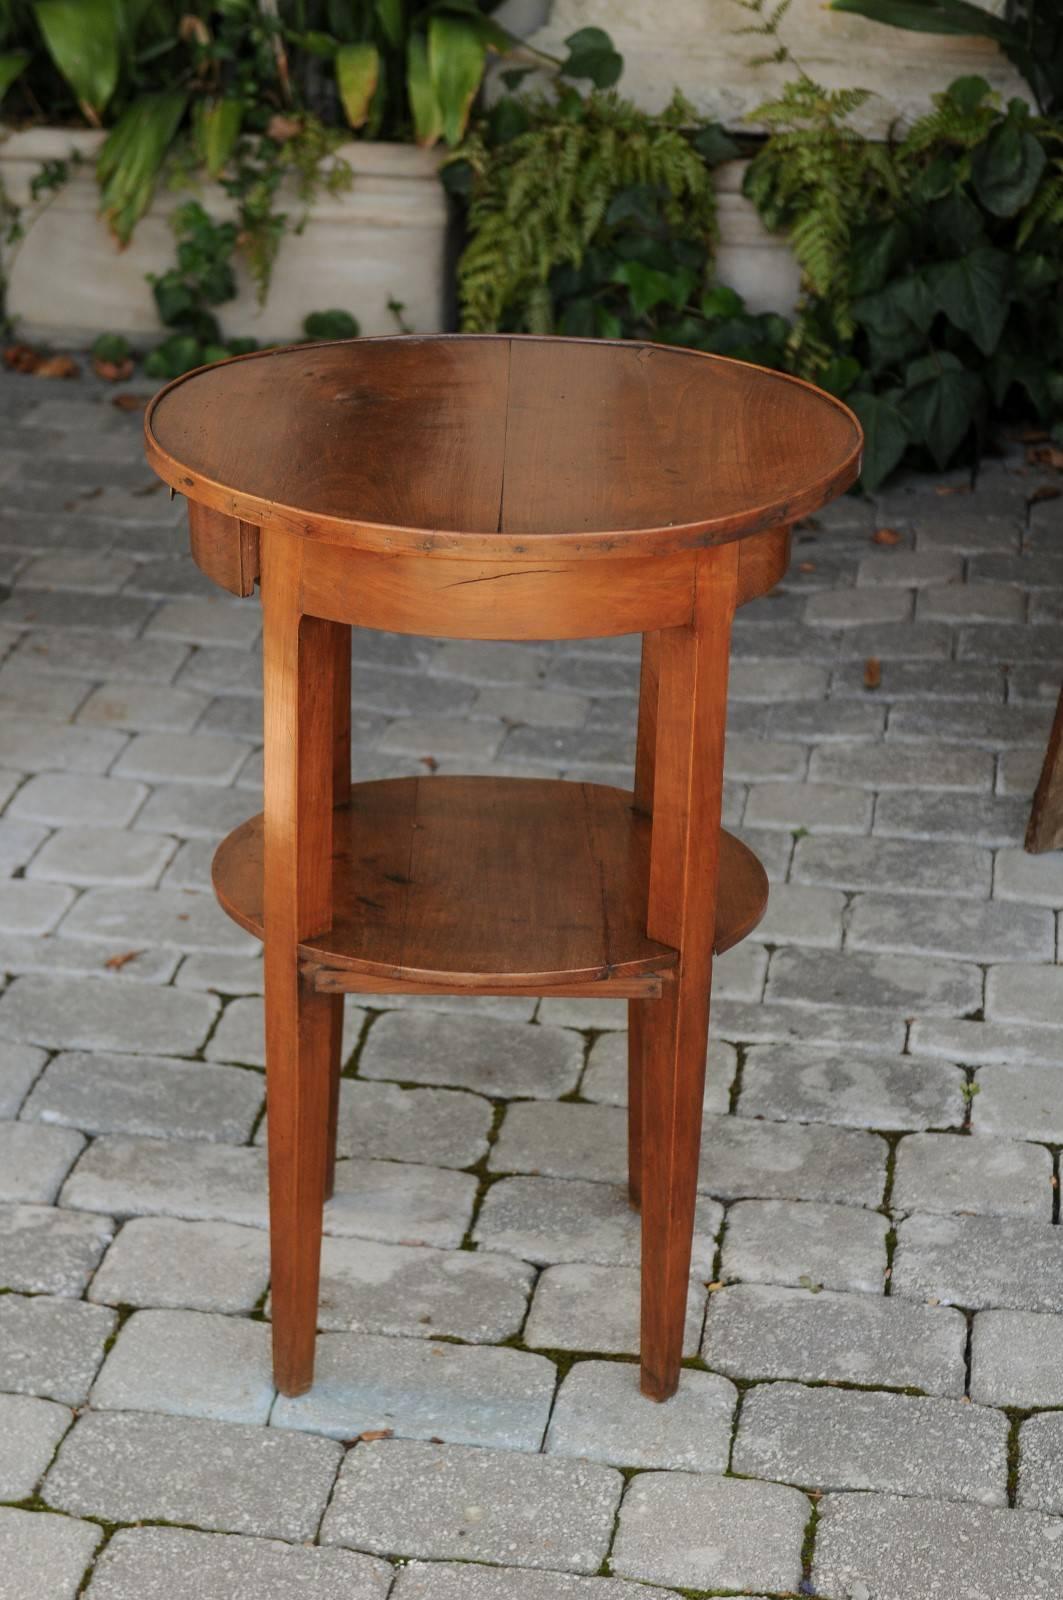 French Circular Side Table with Single Drawer and Lower Shelf from the 1840s 5